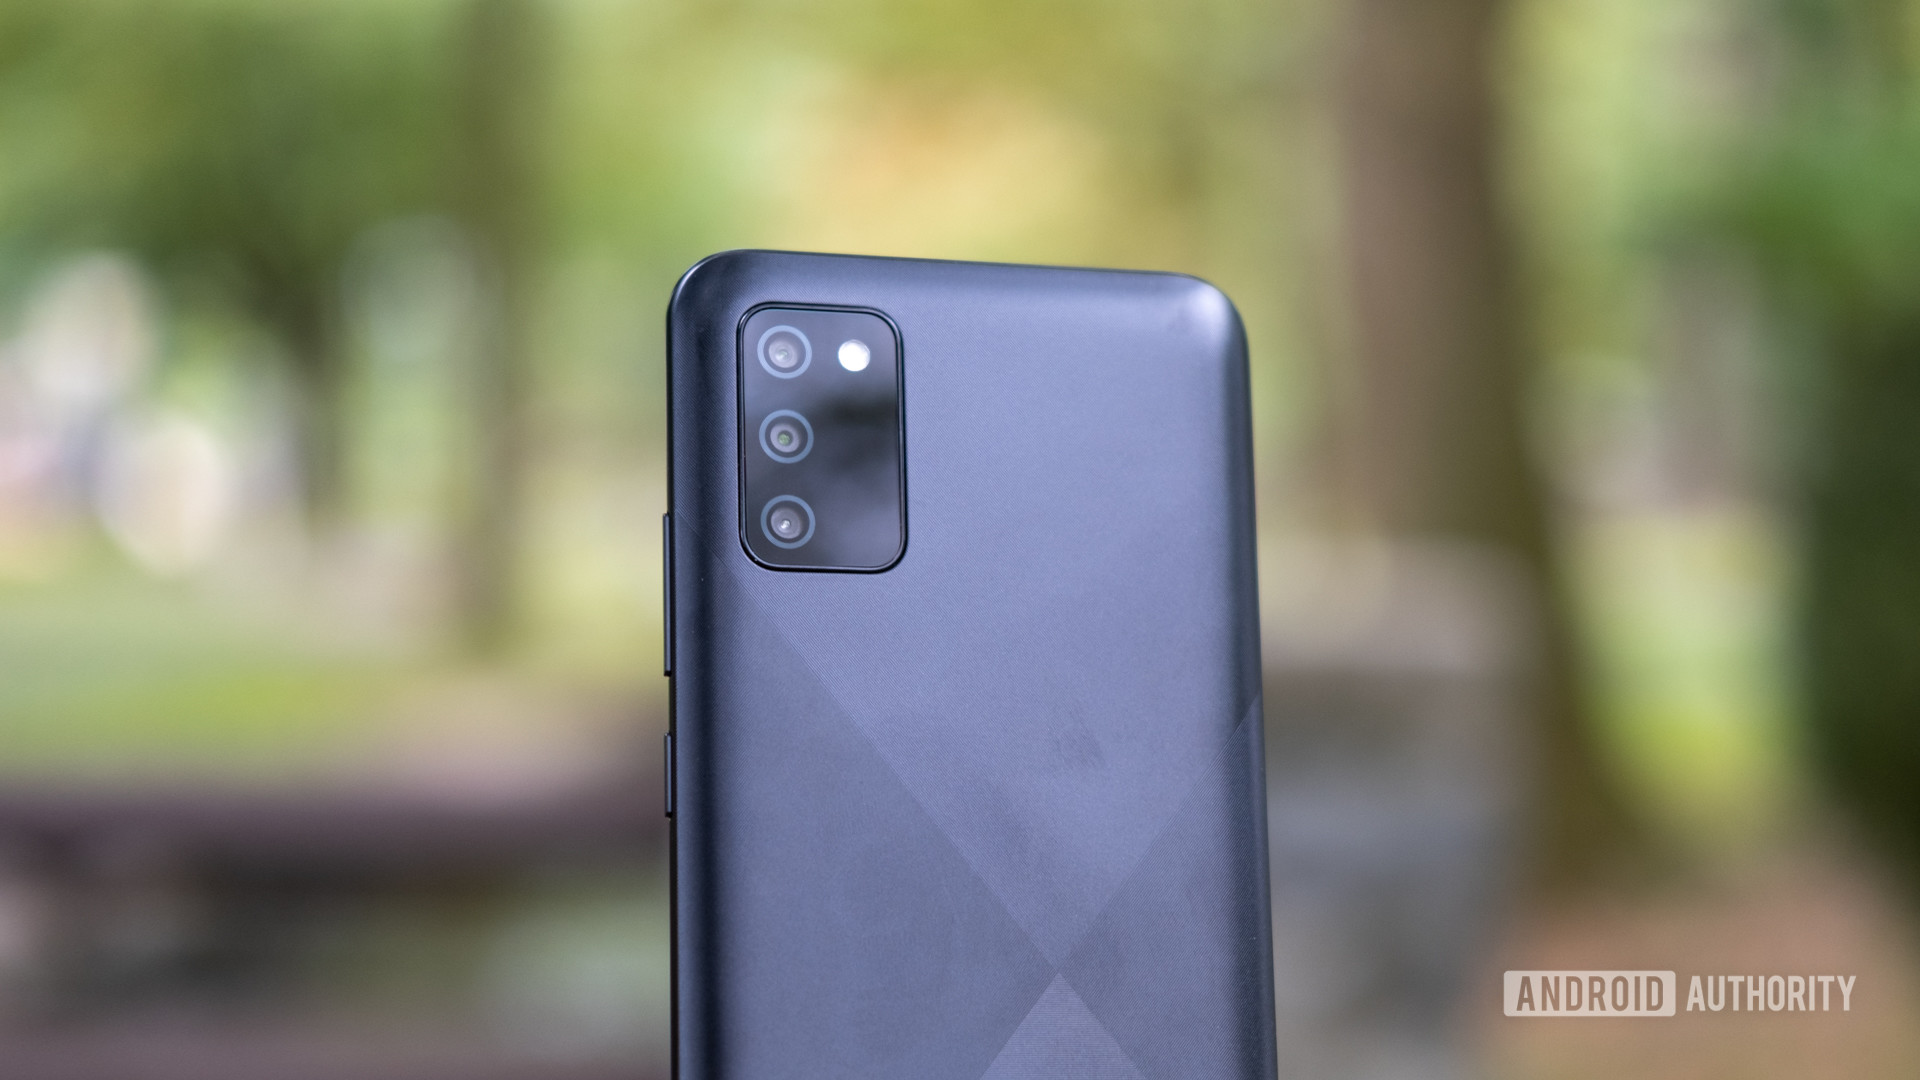 The Galaxy A02s back panel and cameras